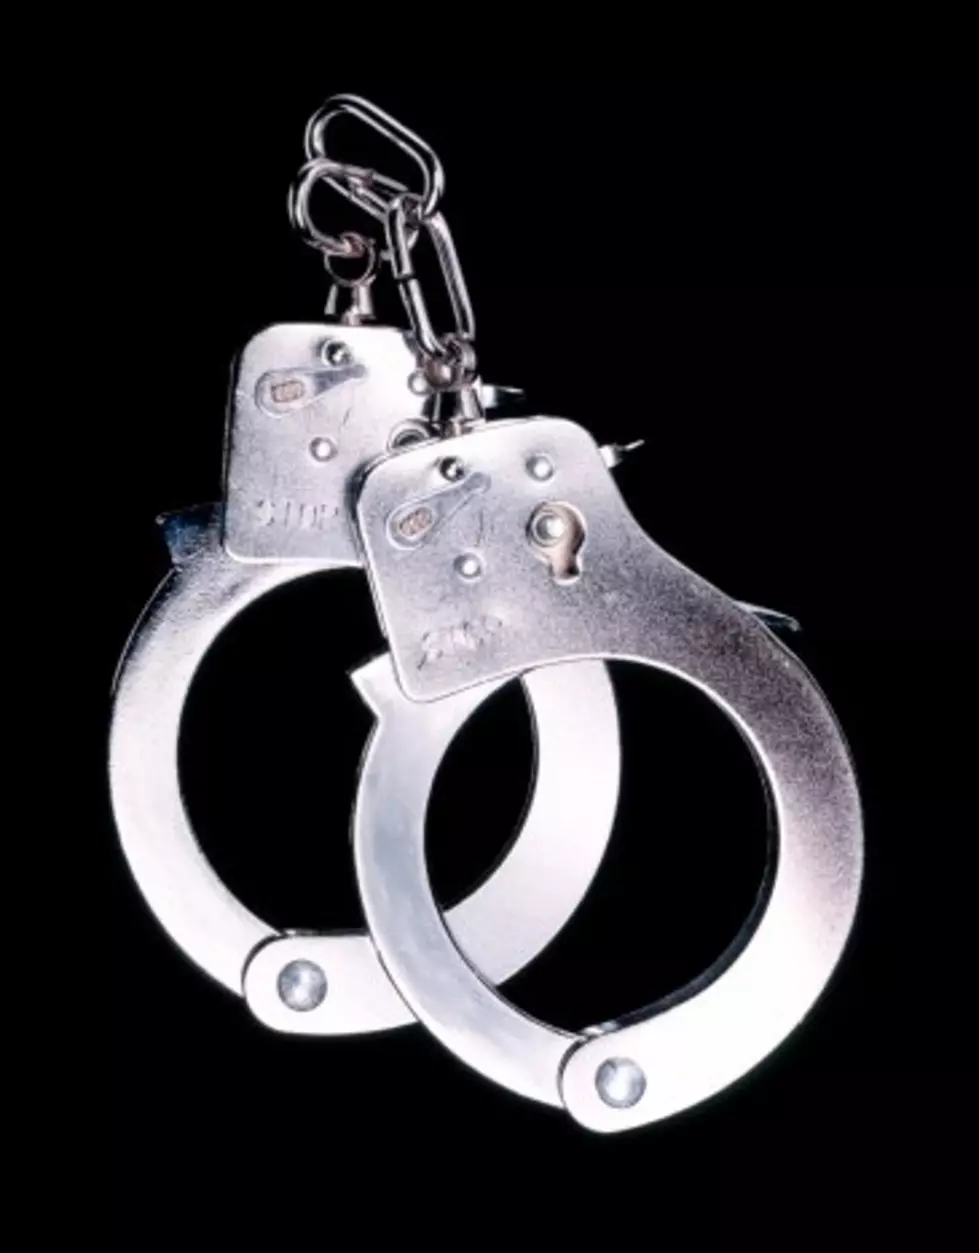 Seven Arrested in Multi-State Jewelry-Theft Ring